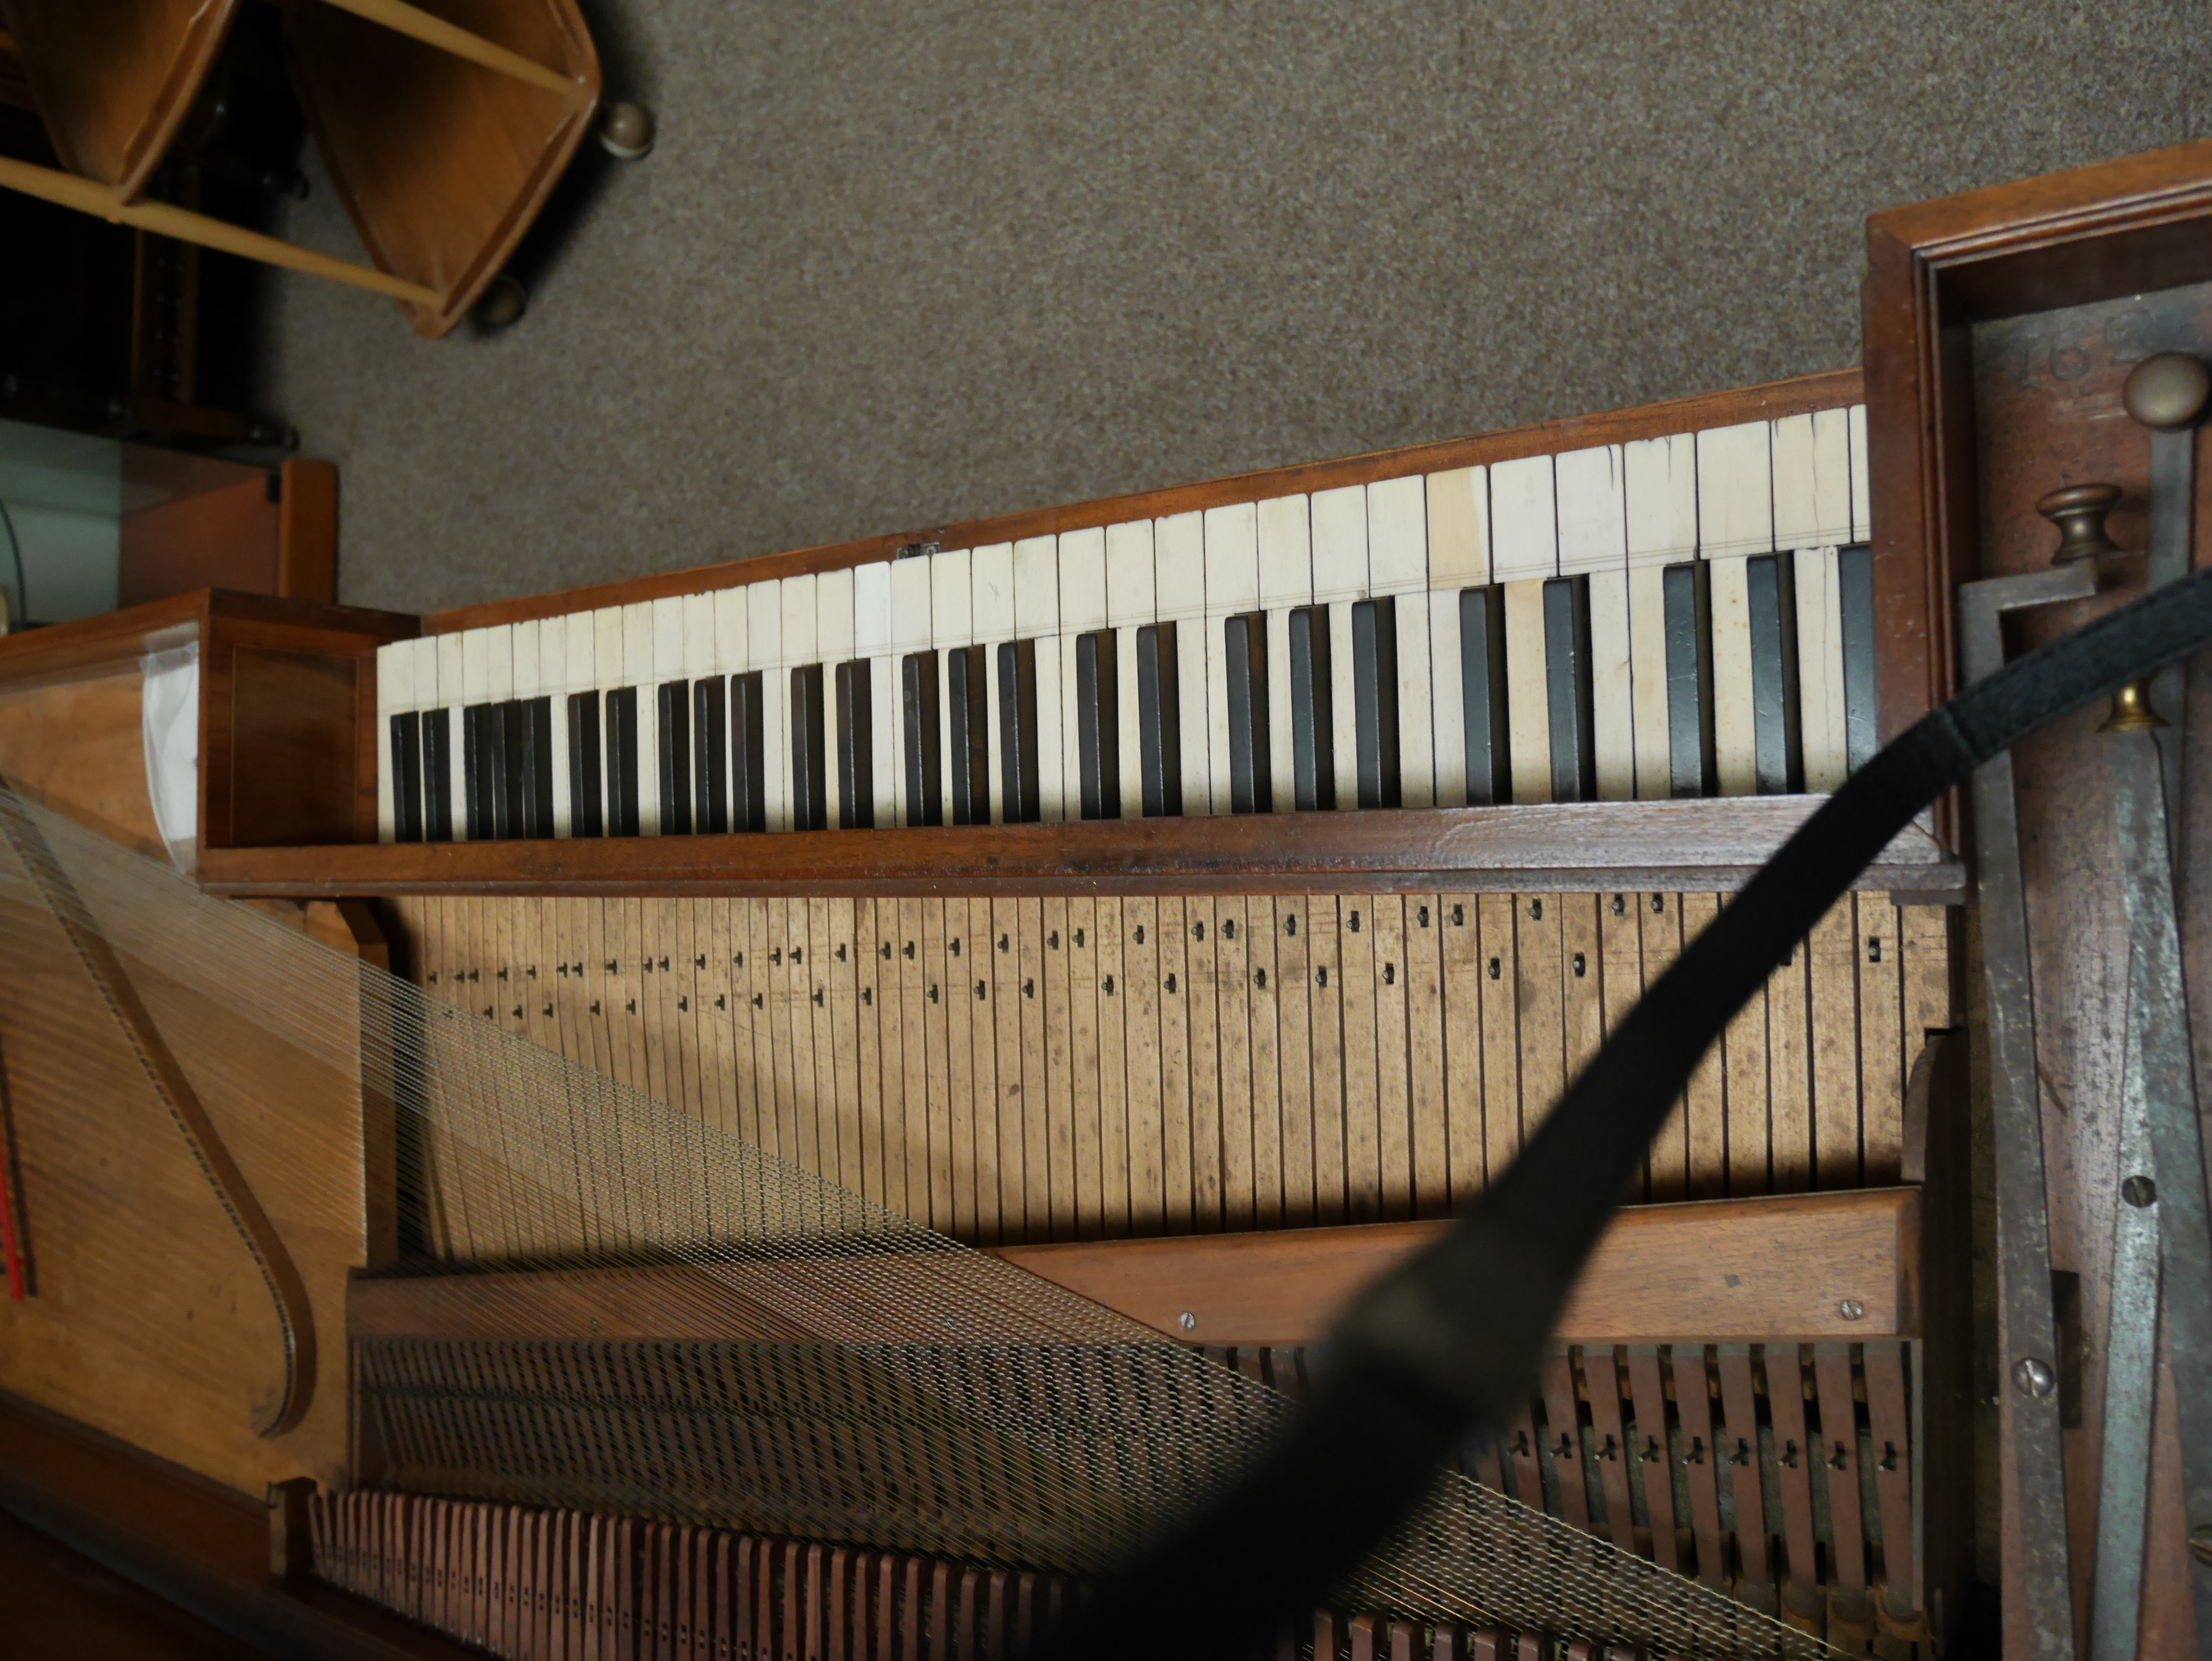 Longman & Broderip - Square Piano London good order all keys play but benefit from tunning - Image 5 of 10